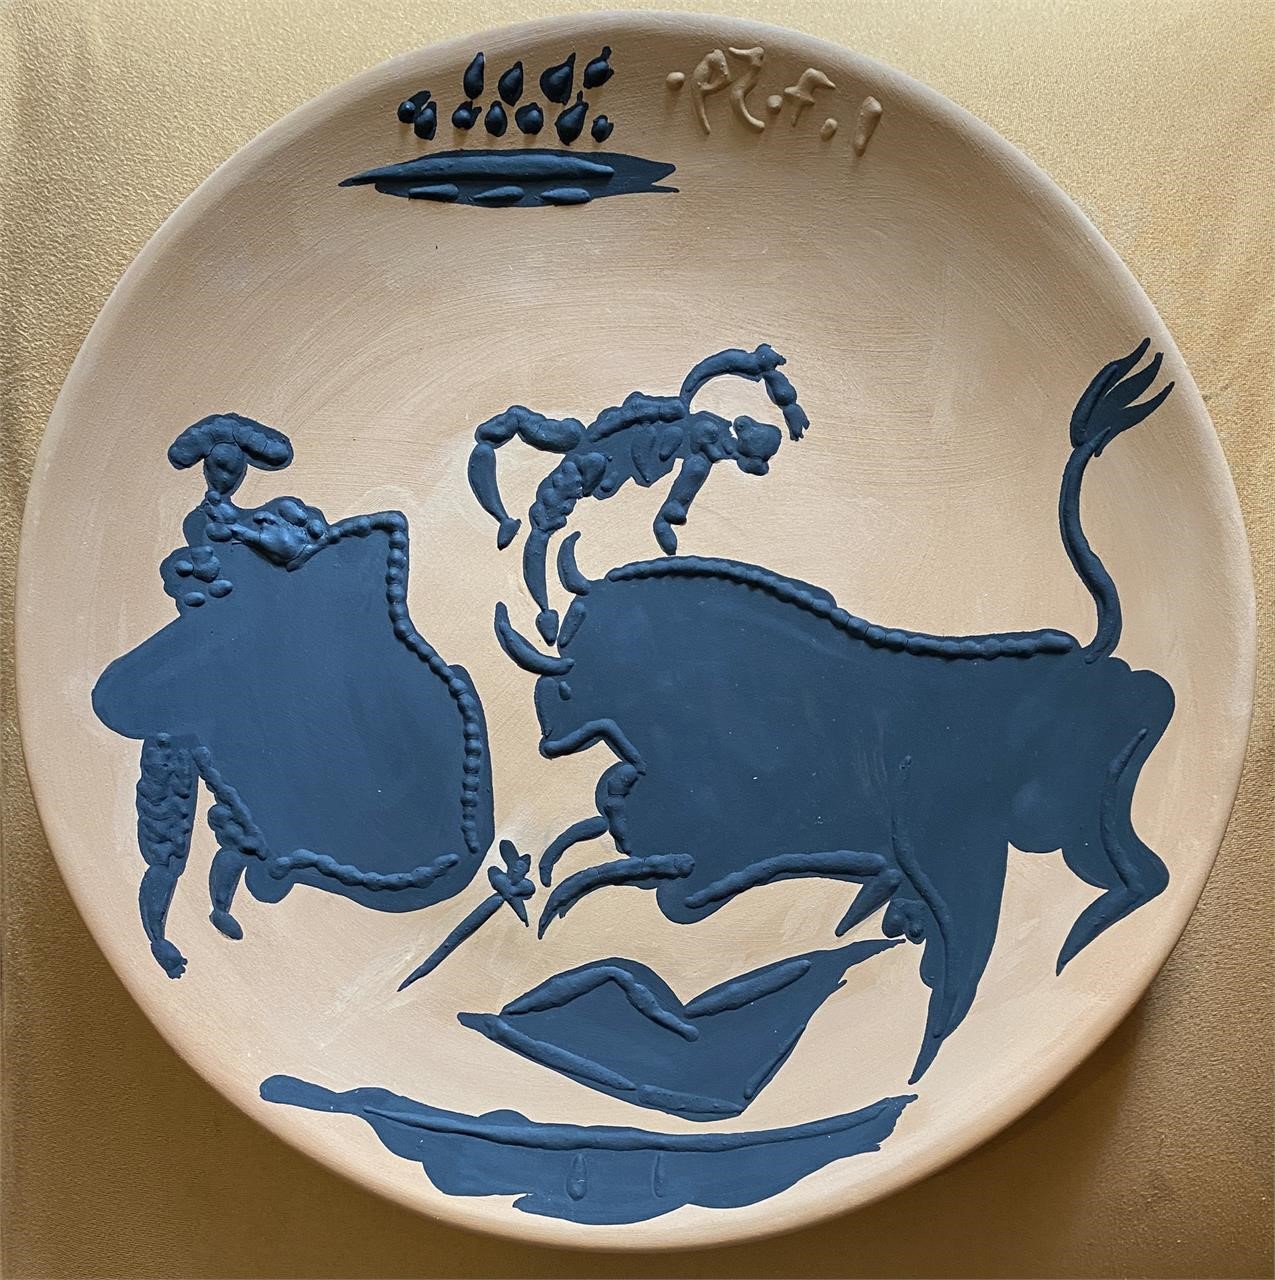 Pablo Picasso Limited Edition Ceramic Plate